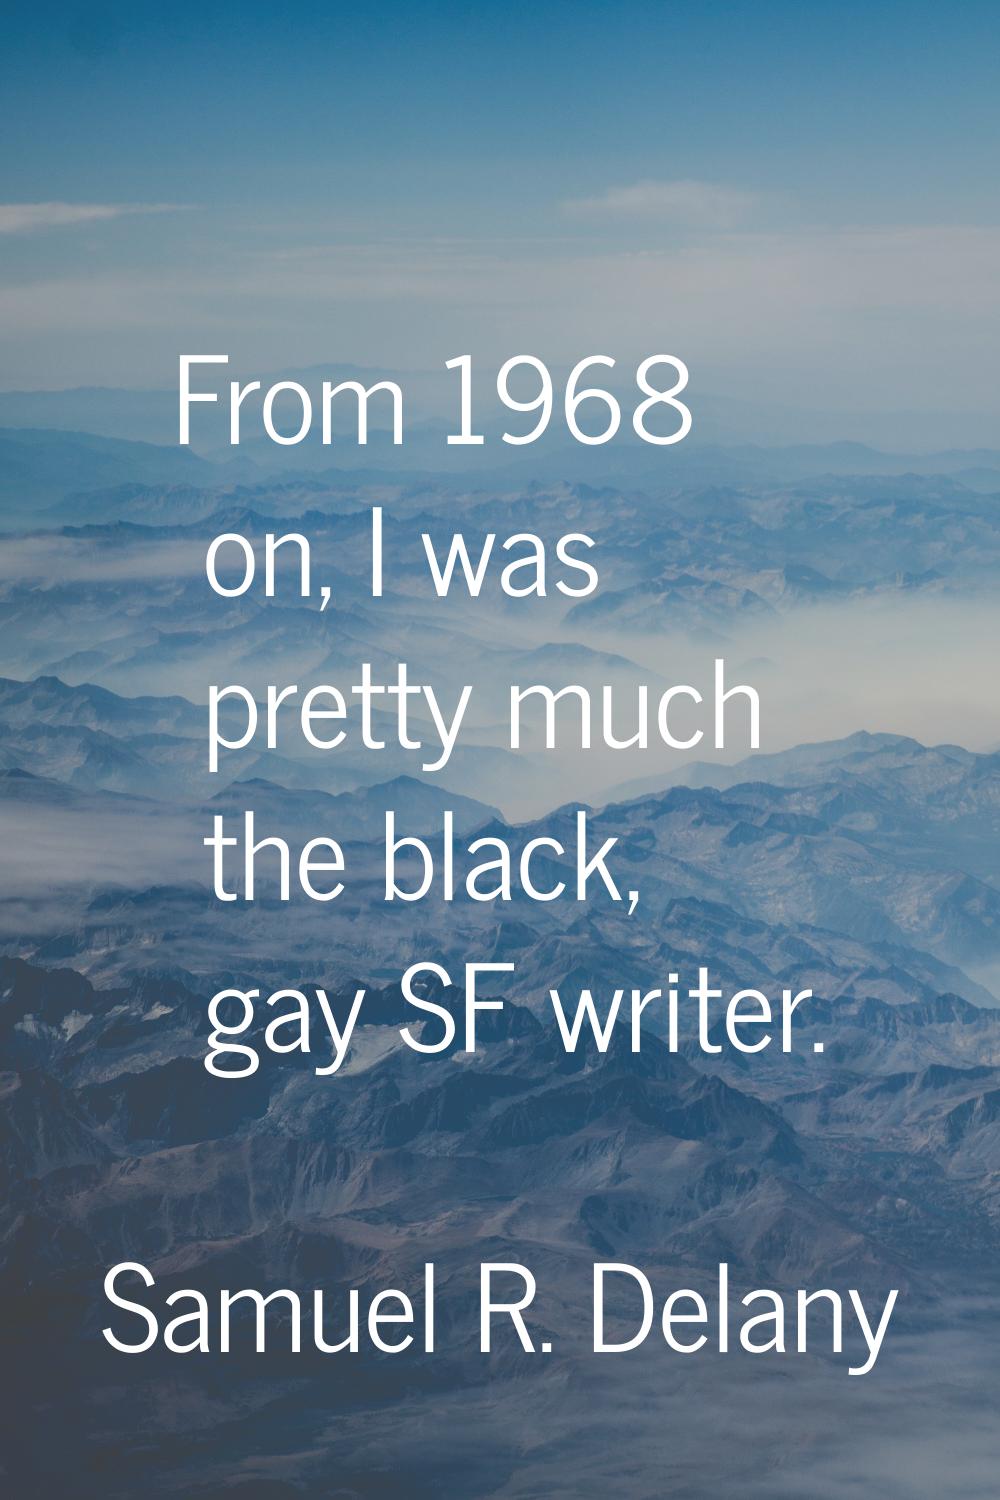 From 1968 on, I was pretty much the black, gay SF writer.